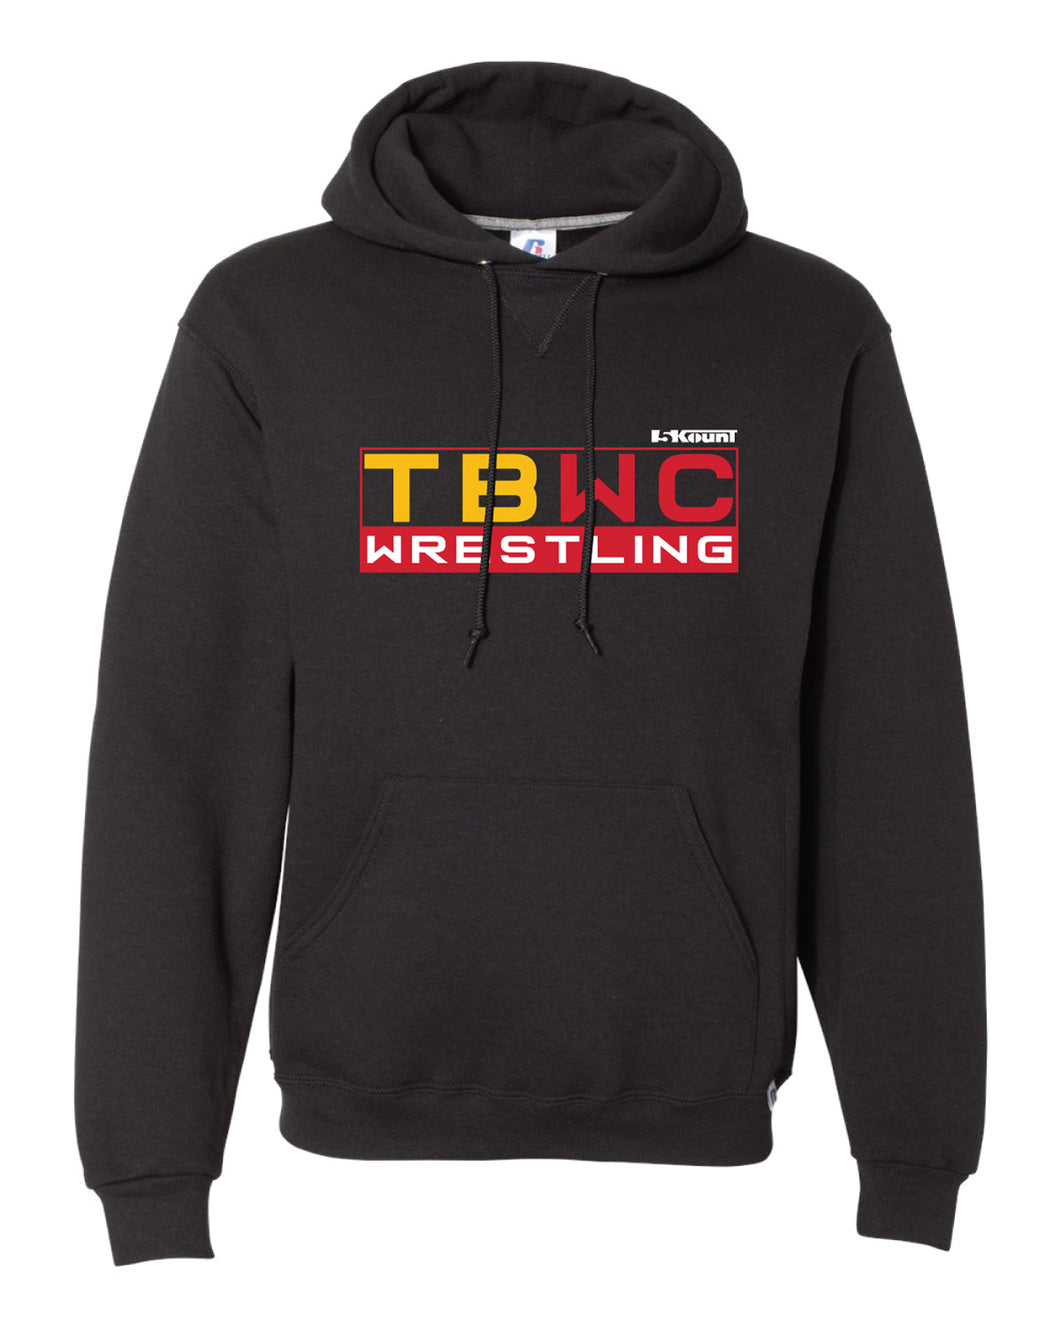 TBWC Wrestling Russell Athletic Cotton Hoodie - Black - 5KounT2018